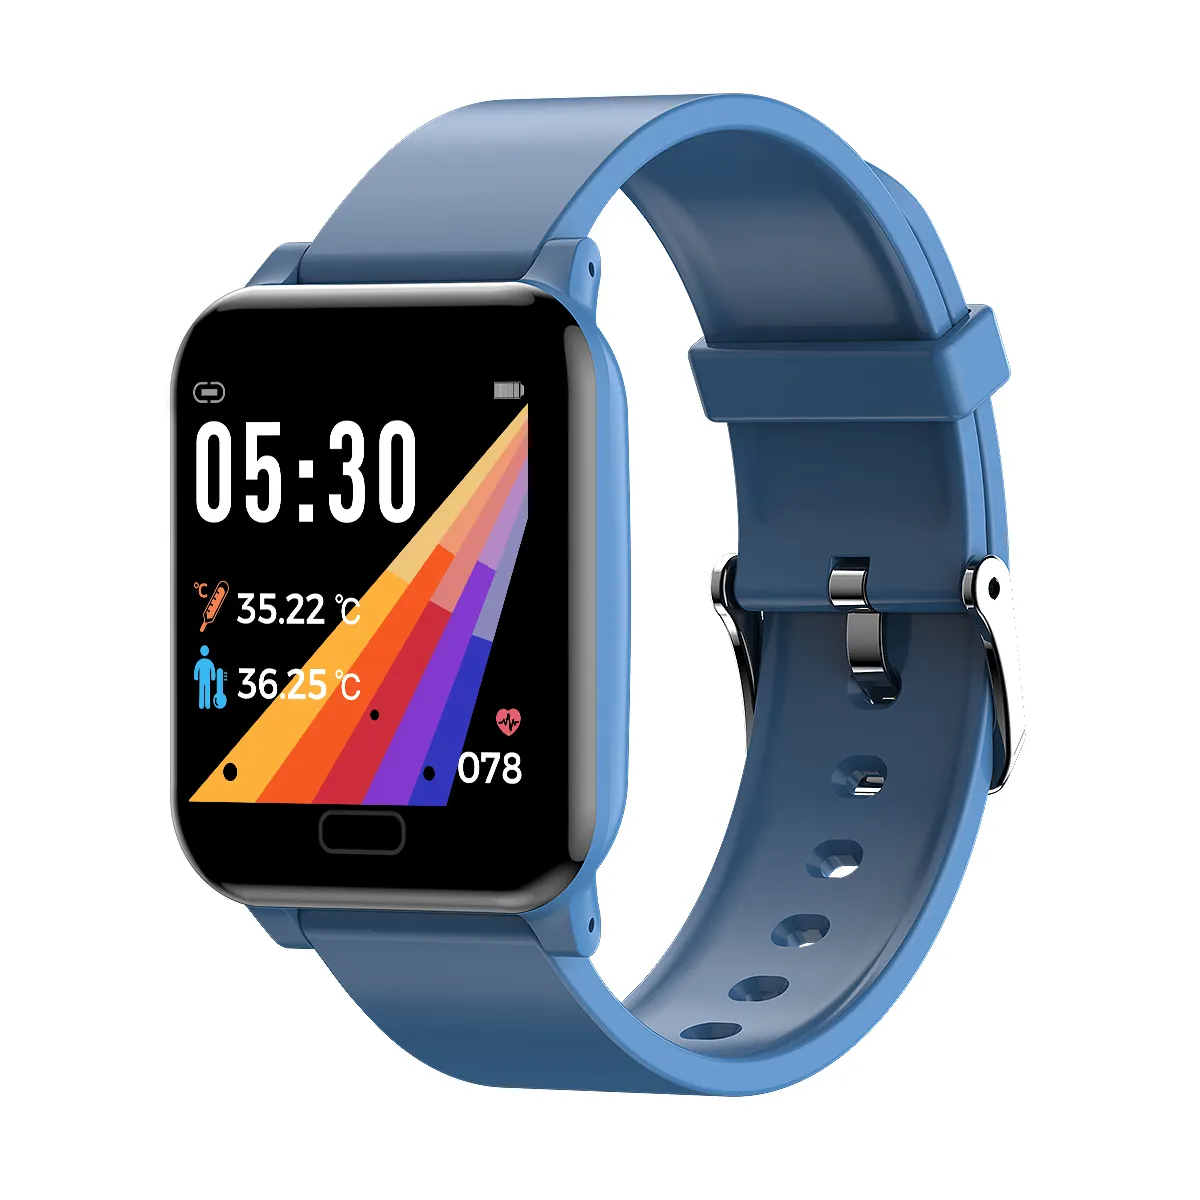 SKMEI Weather Forecast temperature android smart wrist watch